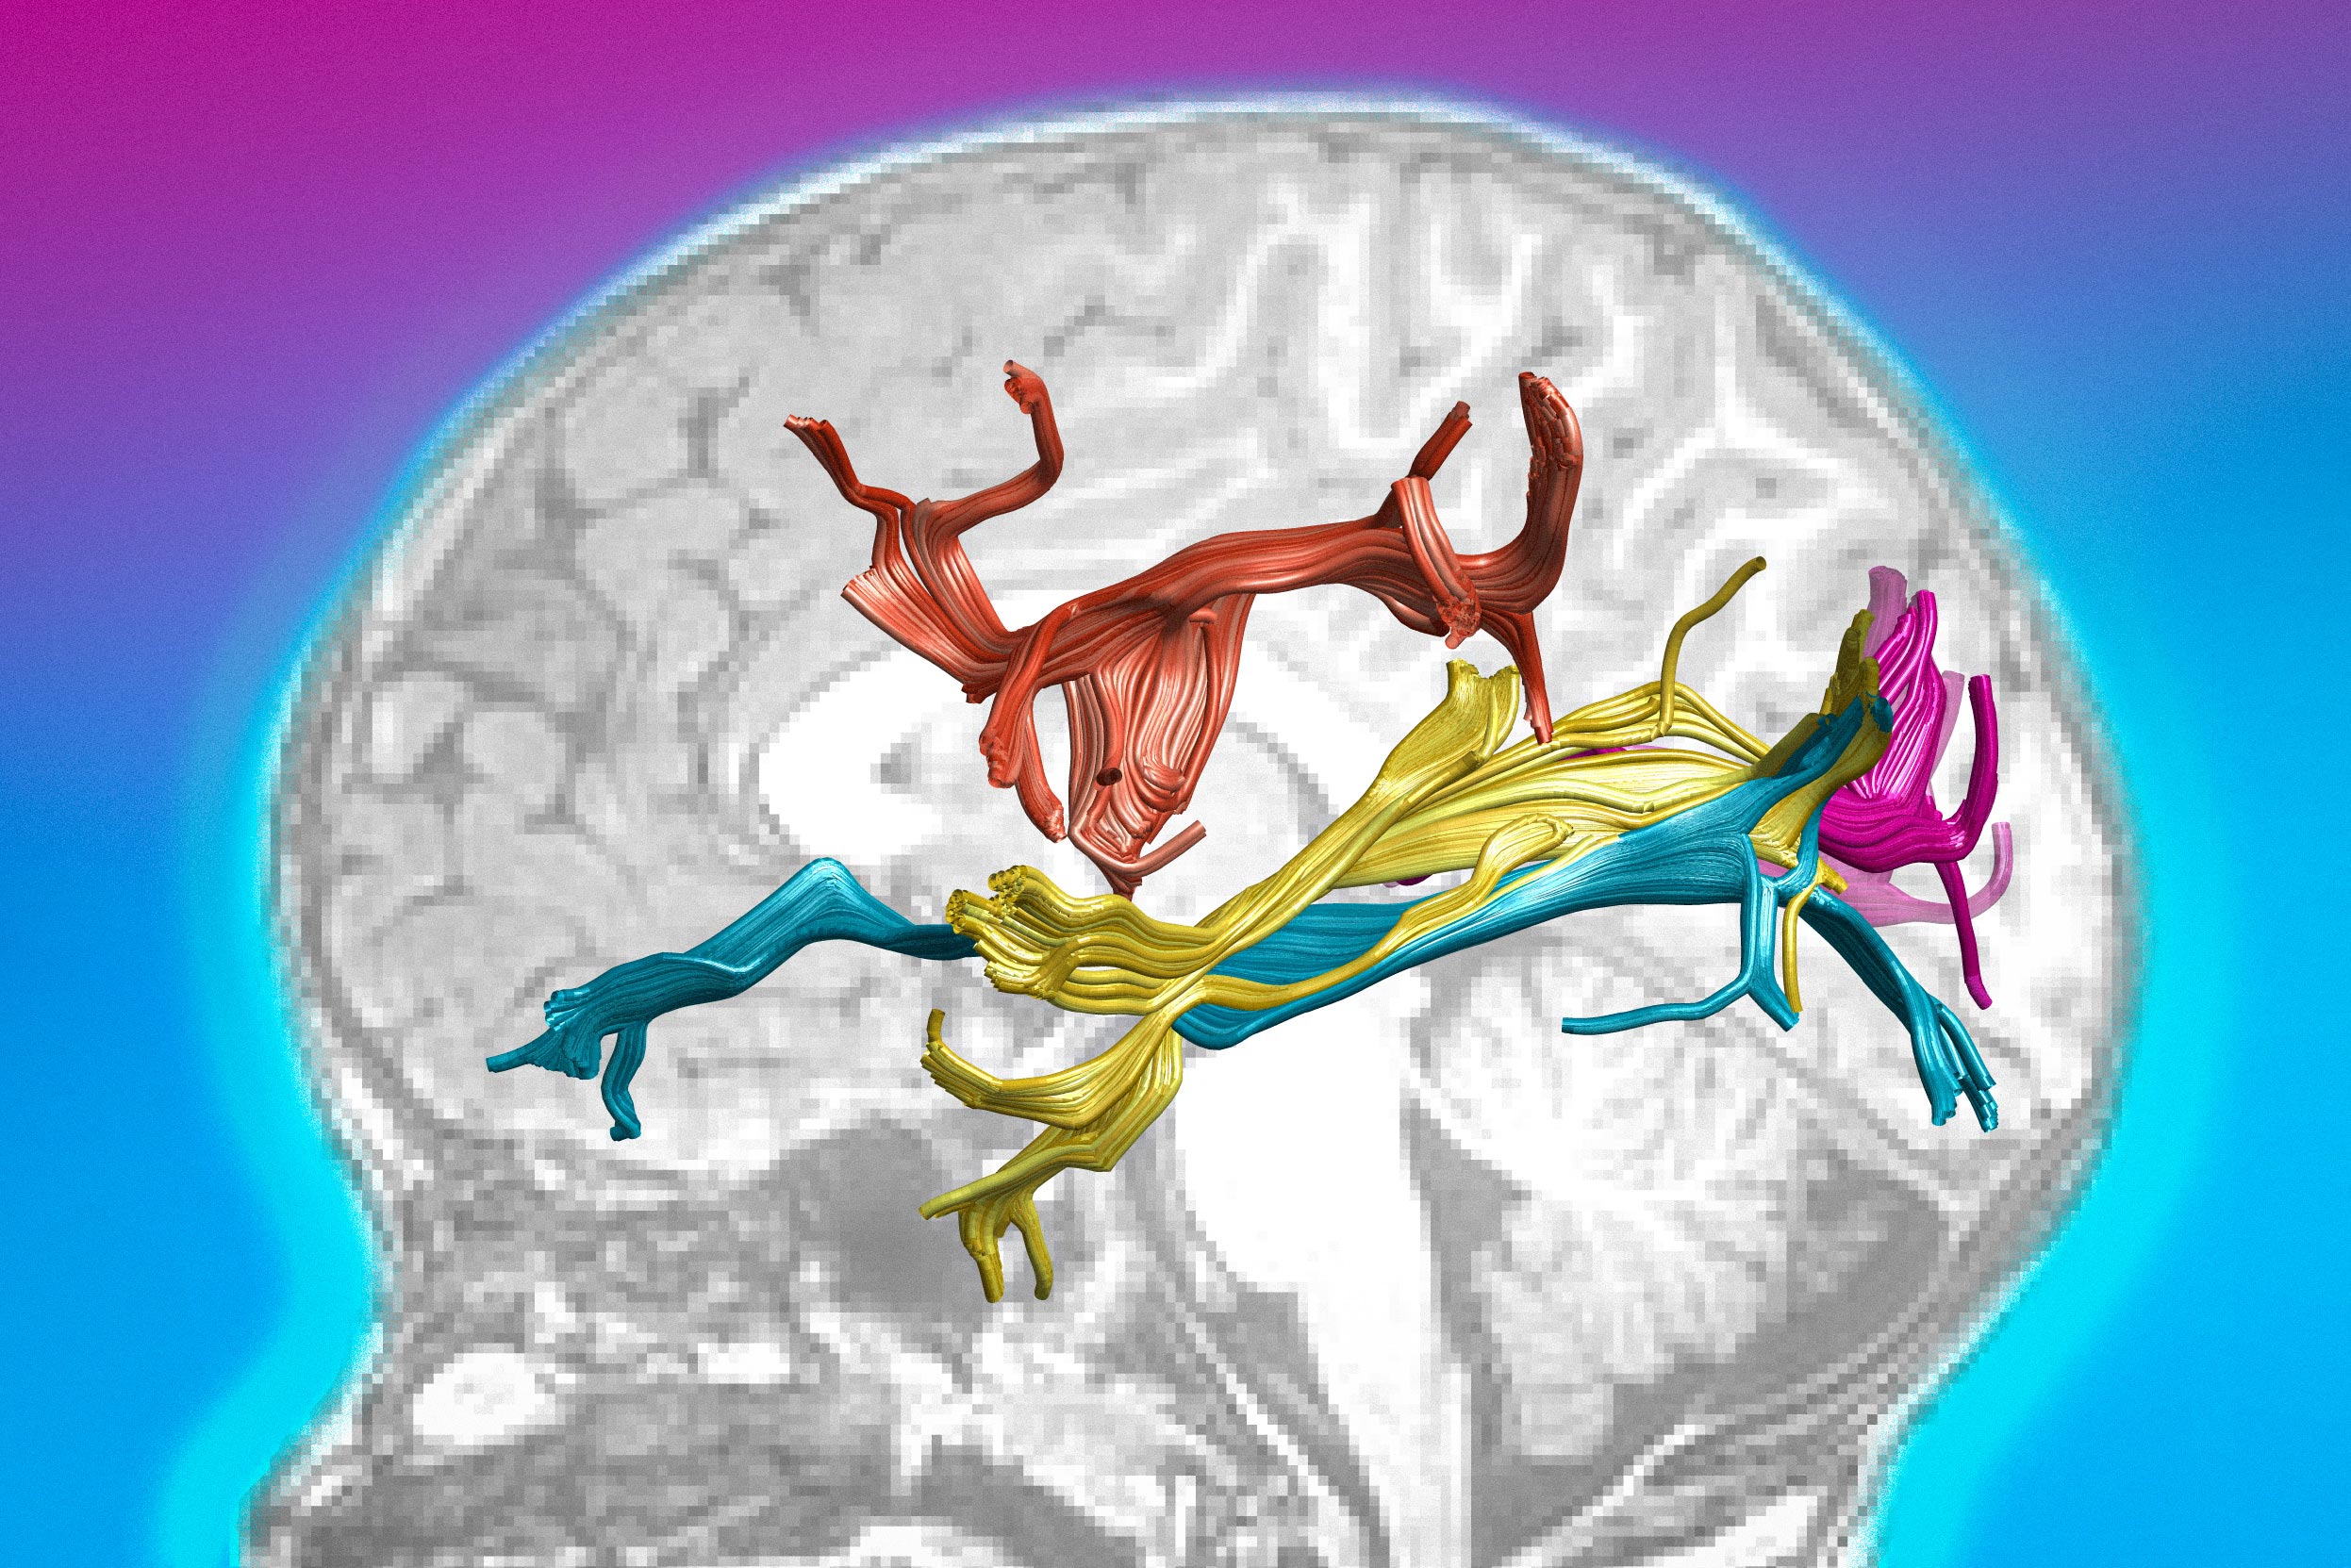 MIT Scientists Discover Surprising Anatomical Changes in the Brains of the Newly Sighted